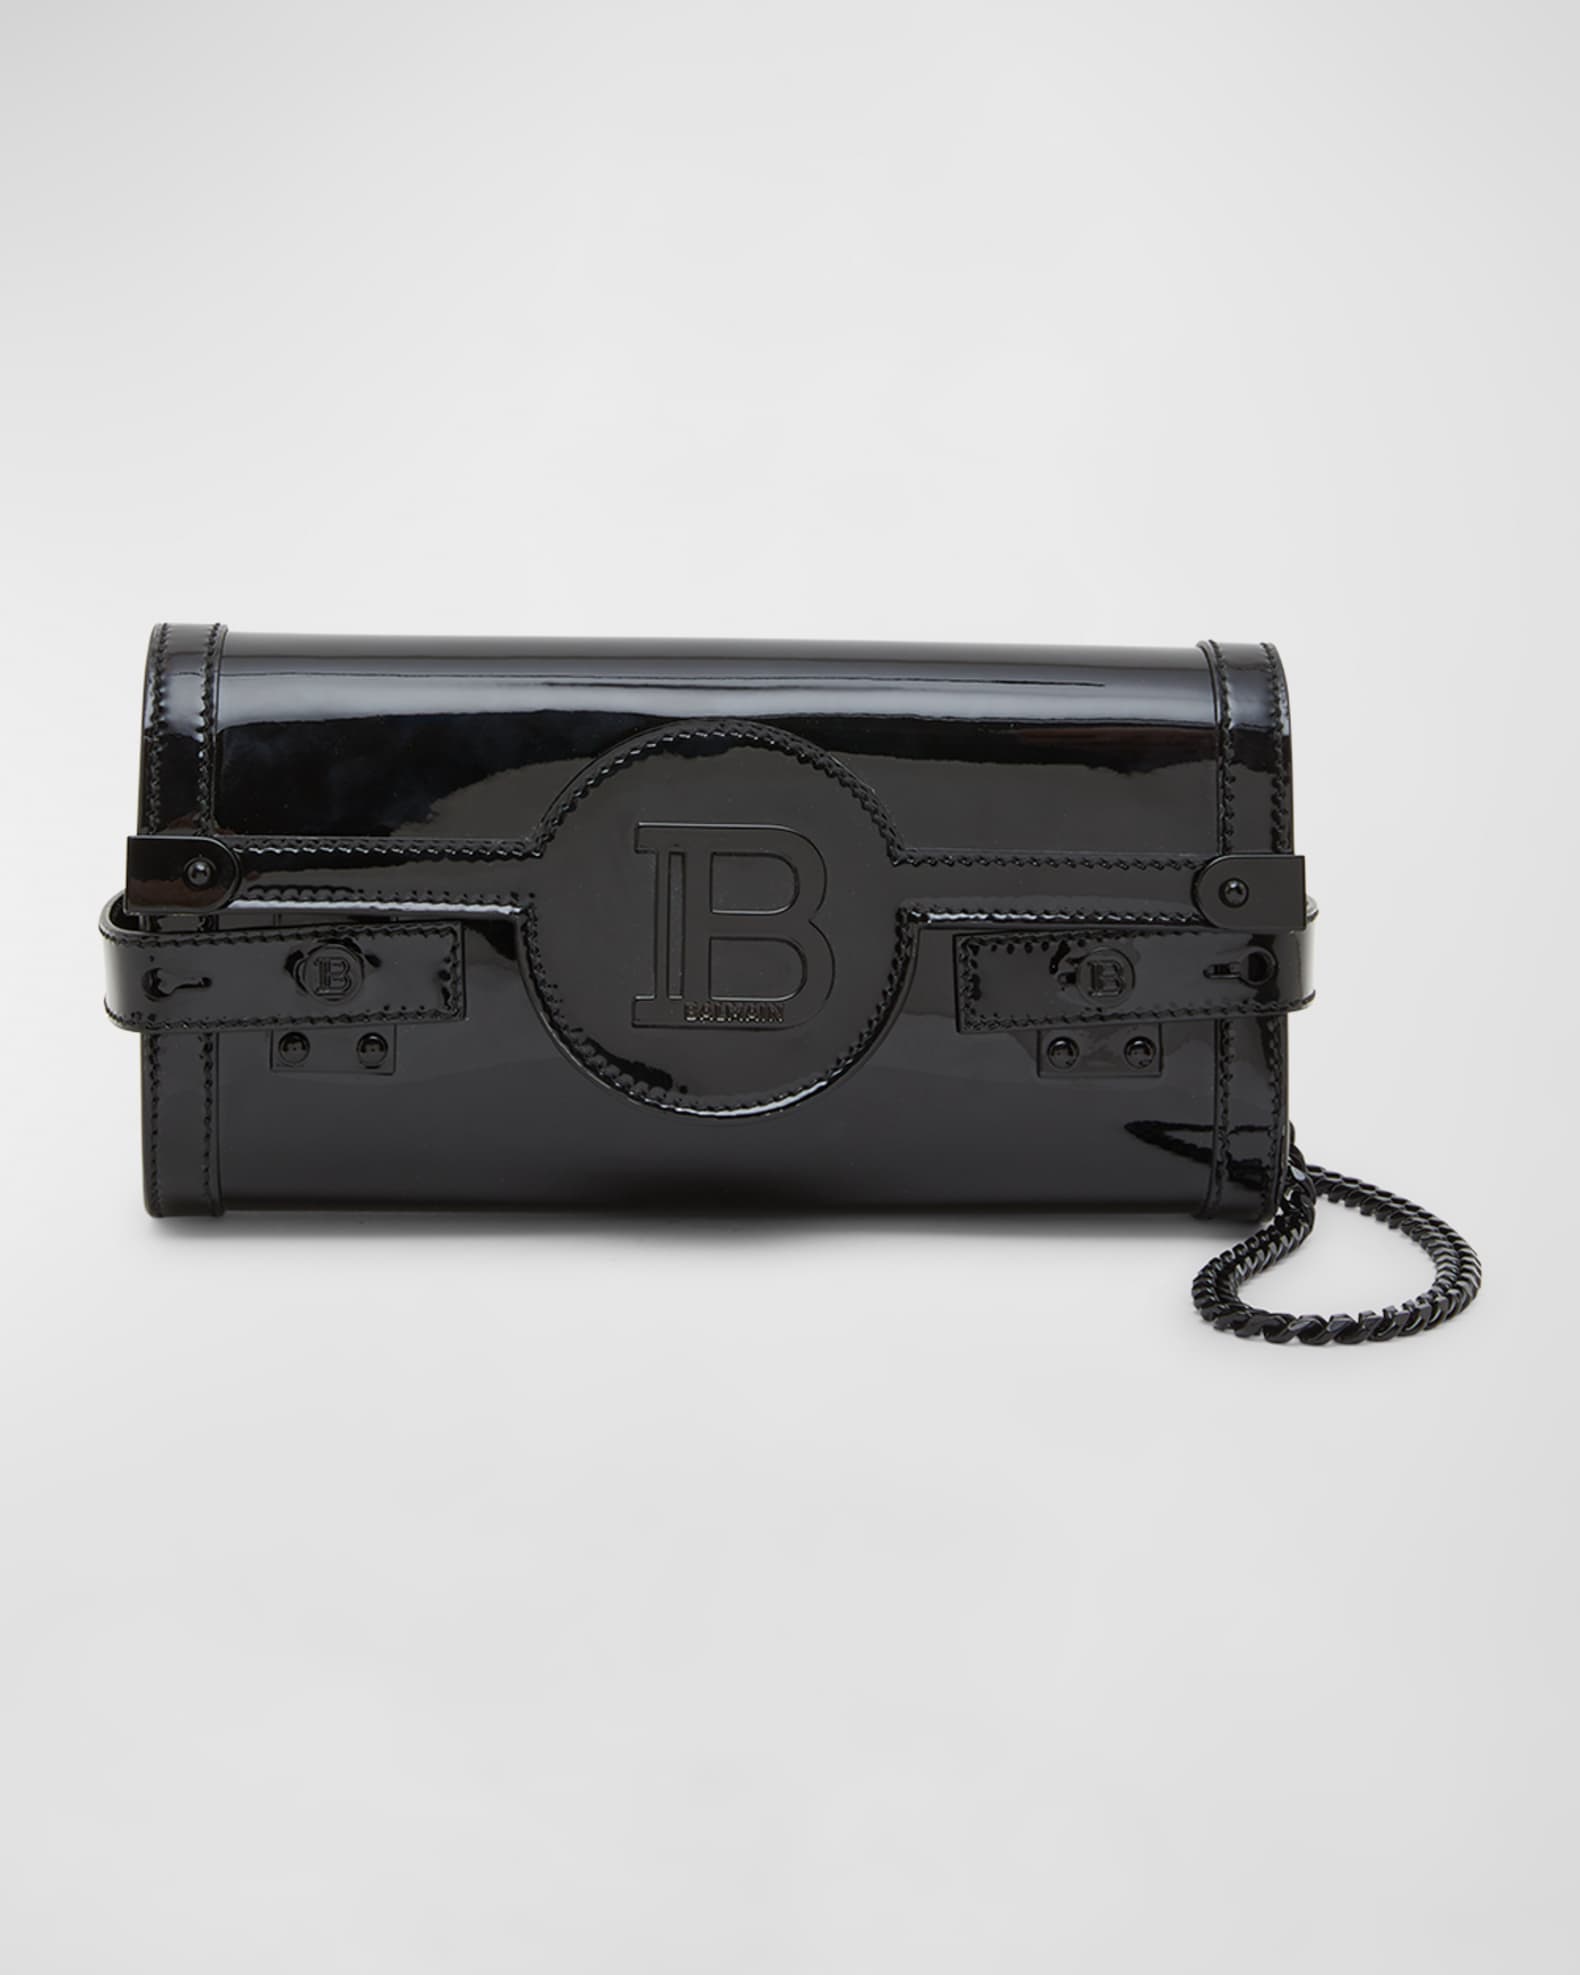 Dior Clutches and evening bags for Women, Online Sale up to 25% off